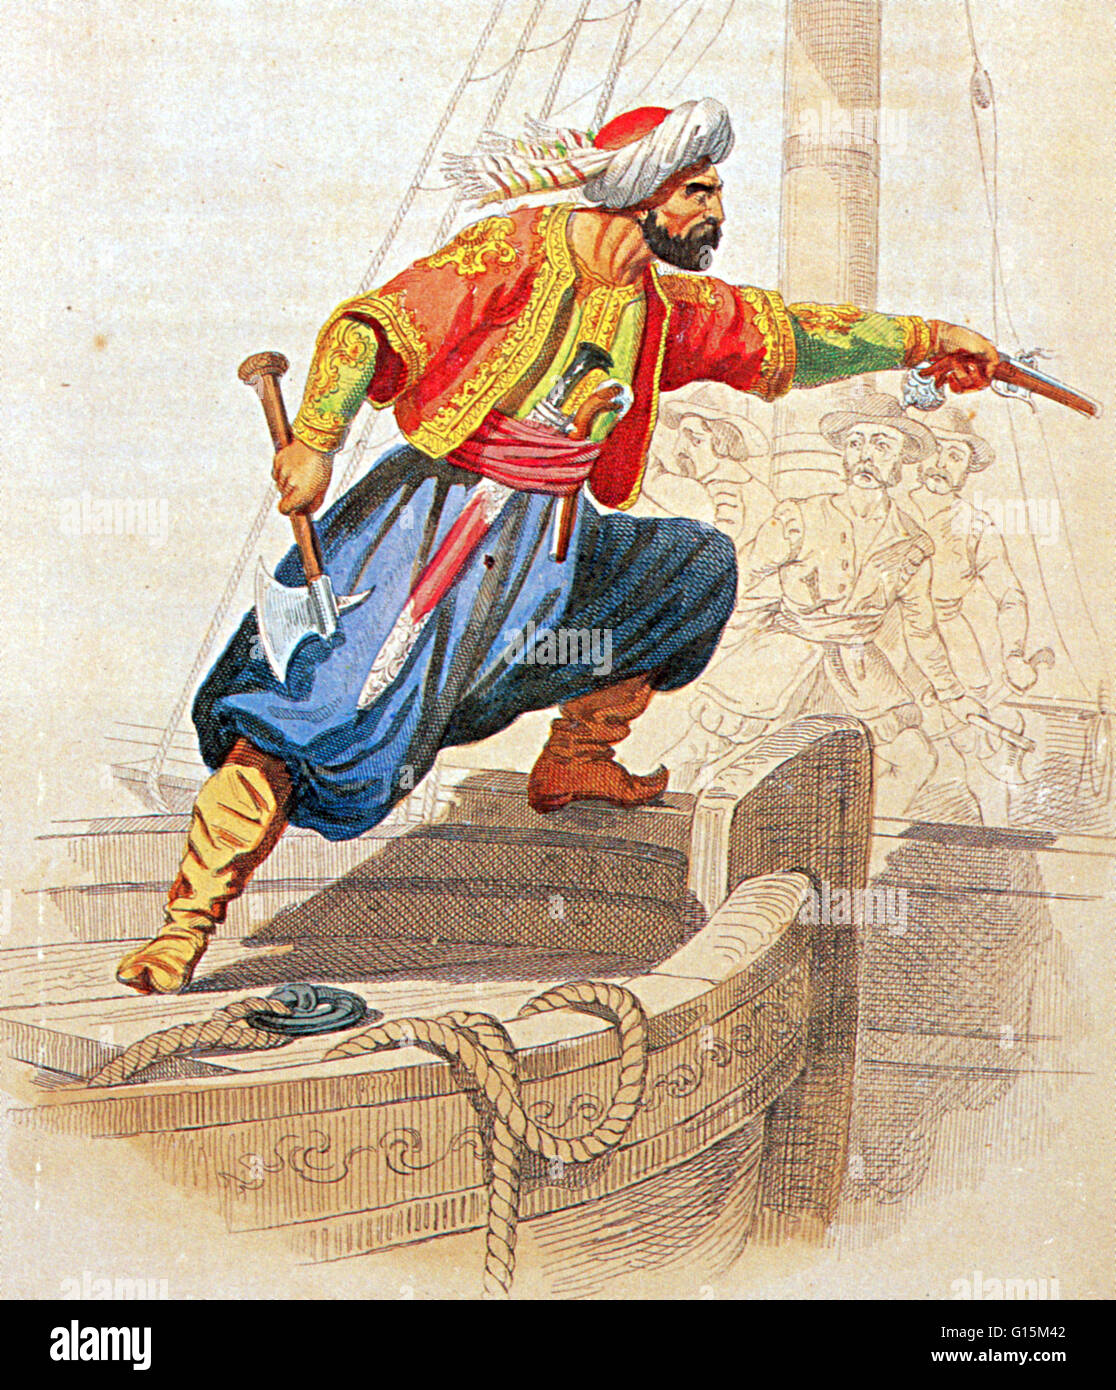 Illustration of Turgut Reis preparing for the boarding of an enemy ship. Turgut Reis (1485-1565) was an Ottoman Admiral and privateer. Under his naval command the Ottoman Empire maritime was extended across North Africa. When Turgut was serving as pasha, Stock Photo